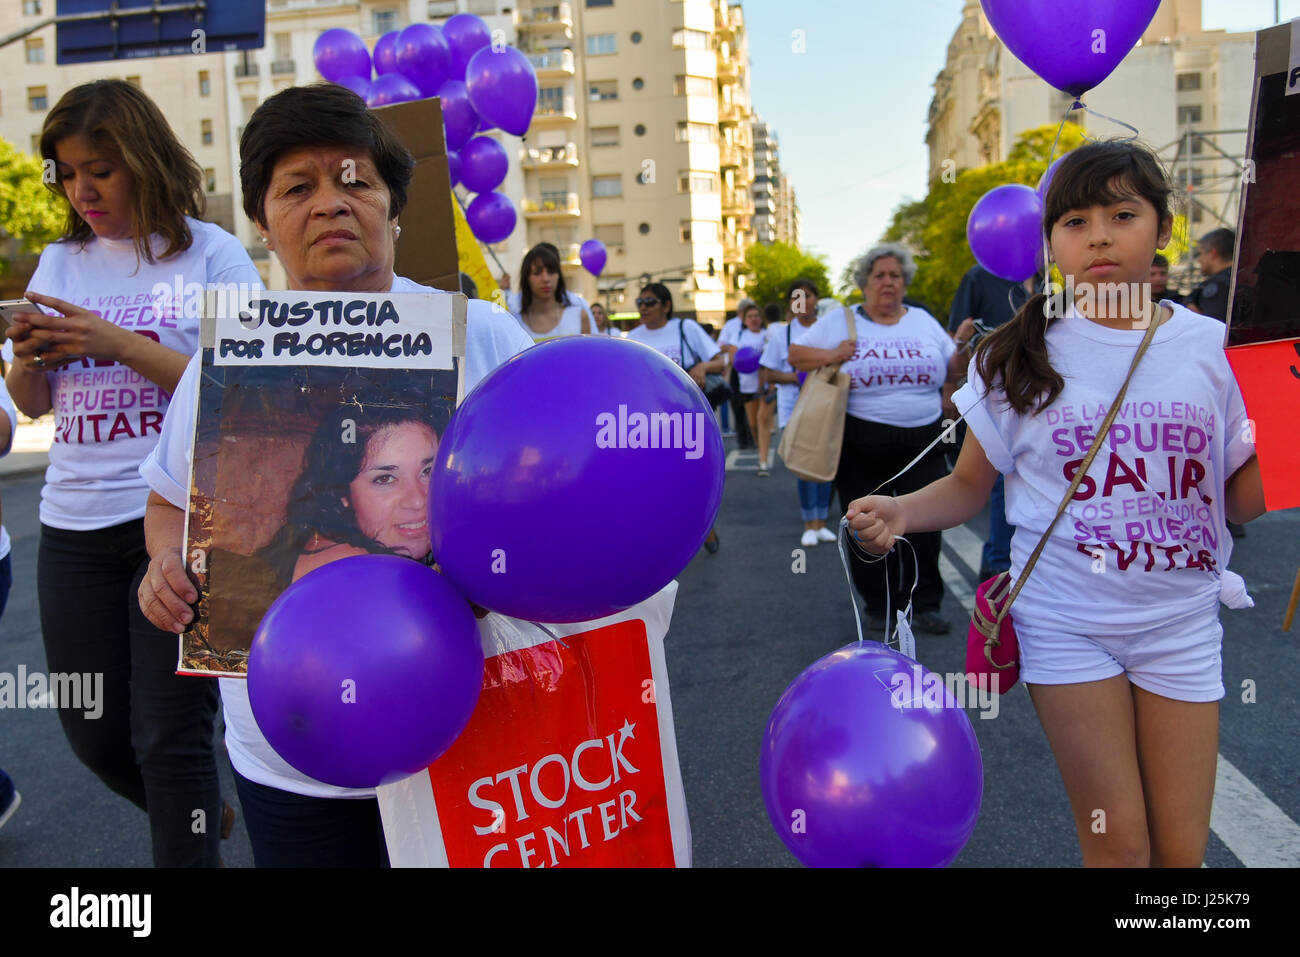 Thousands of women wave banners as they protest violence against women on International Day for the Elimination of Violence against Women in Buenos Aires on November 25, 2016. Stock Photo